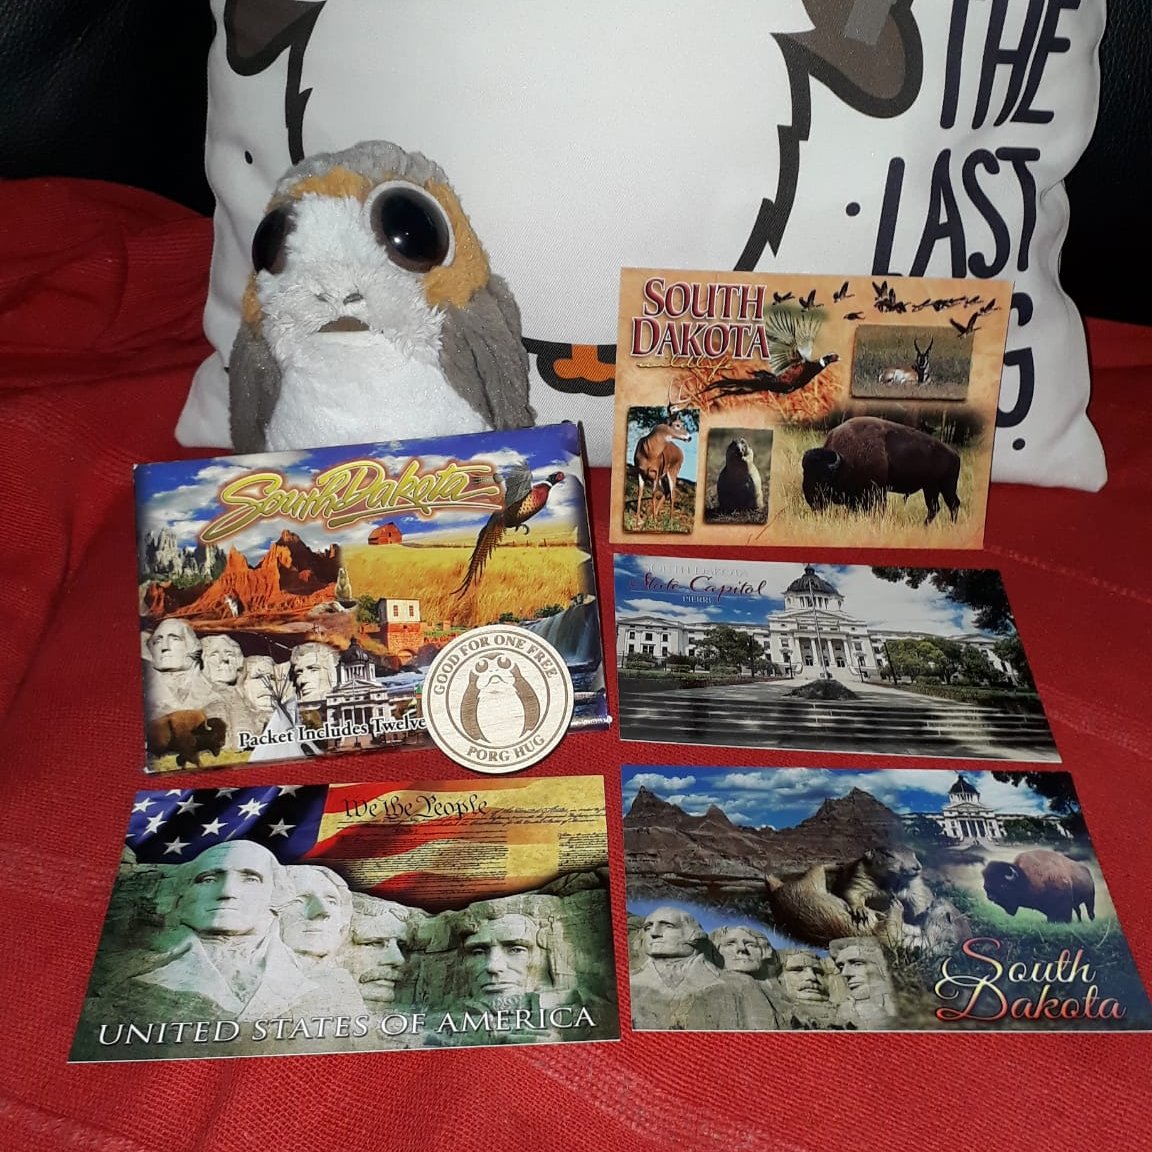 Moin moin! My pal David Fitzpatrick from South Dakota sended me so many cool postcards with wonderful motives from his home state! So cool stuff. But also cool was the little 'free Porg hug' coin maked out of wood he sended with the package! 😀 #porg #porgs #PorgeanEmpire